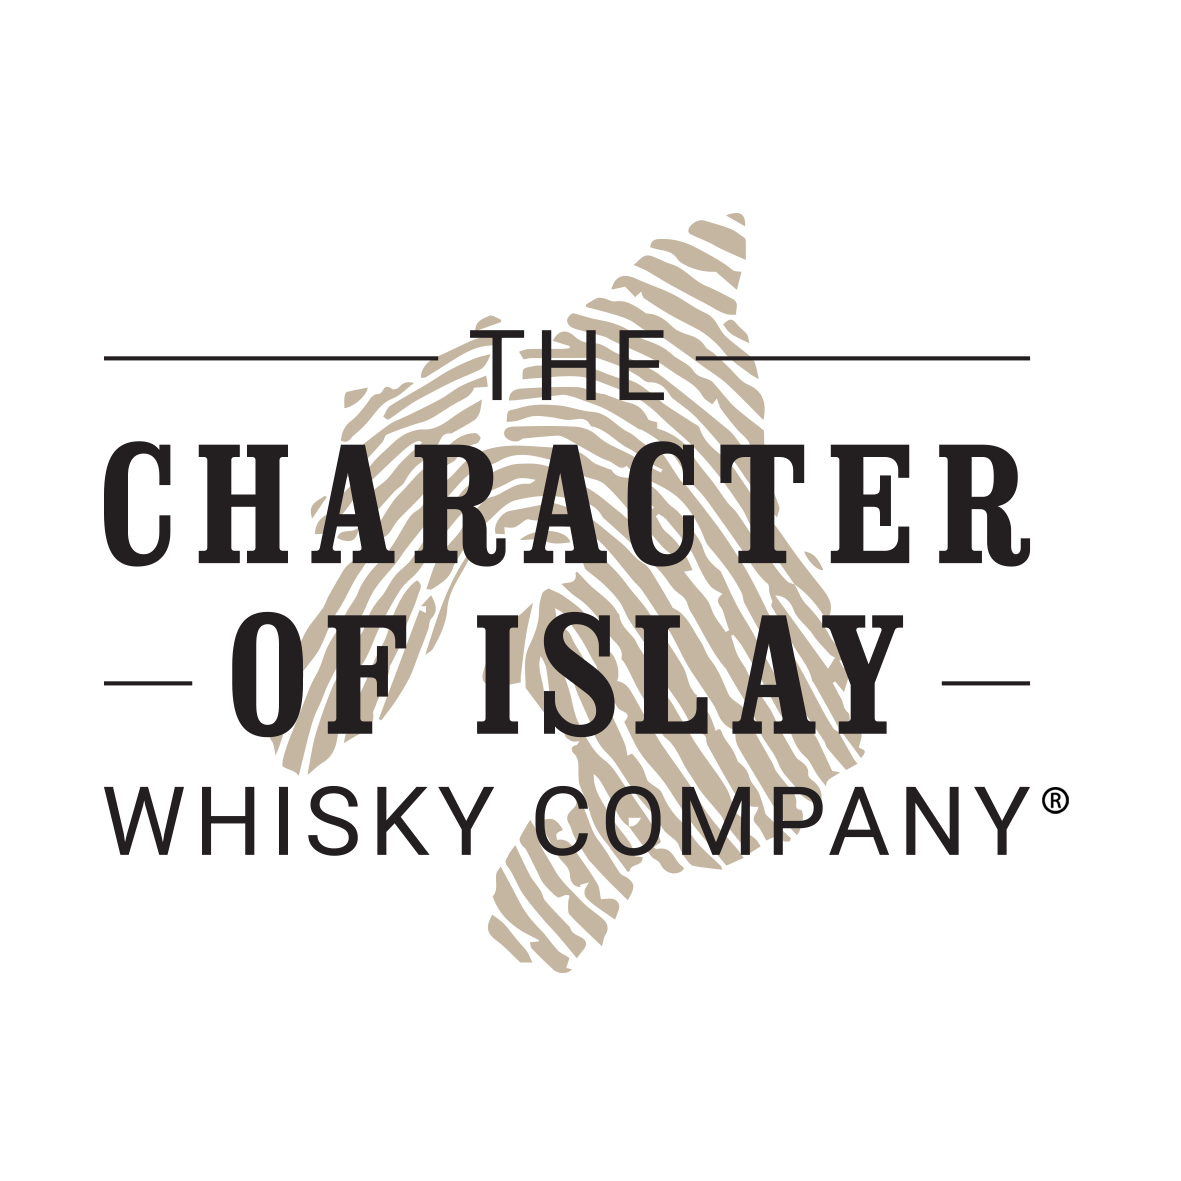 The Character of Islay